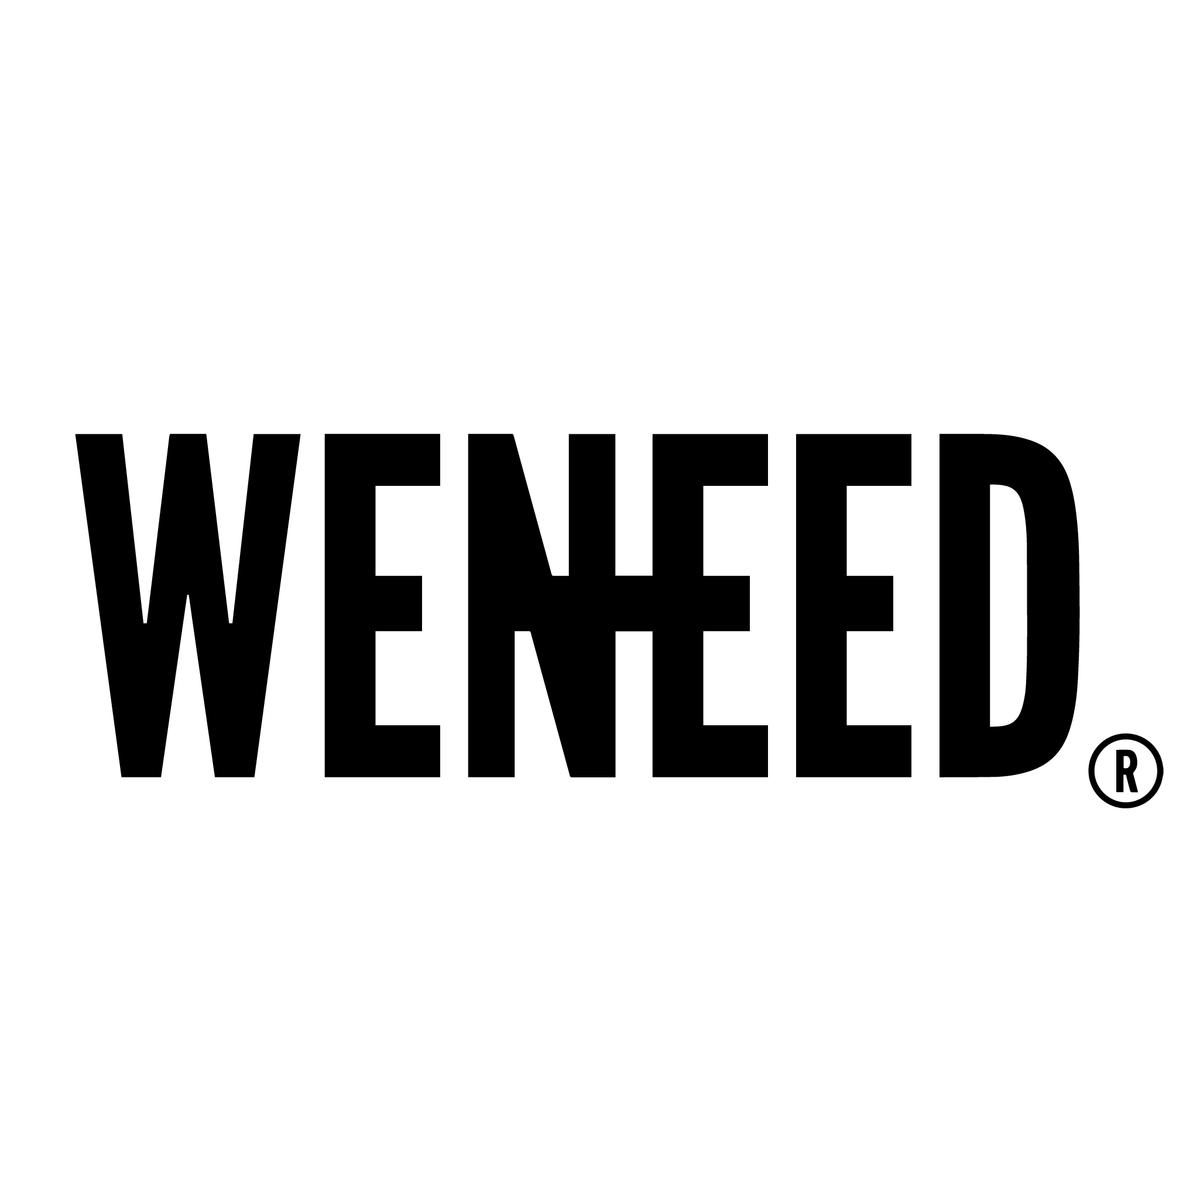 WENEED - The Brand for Smoking Connoisseurs